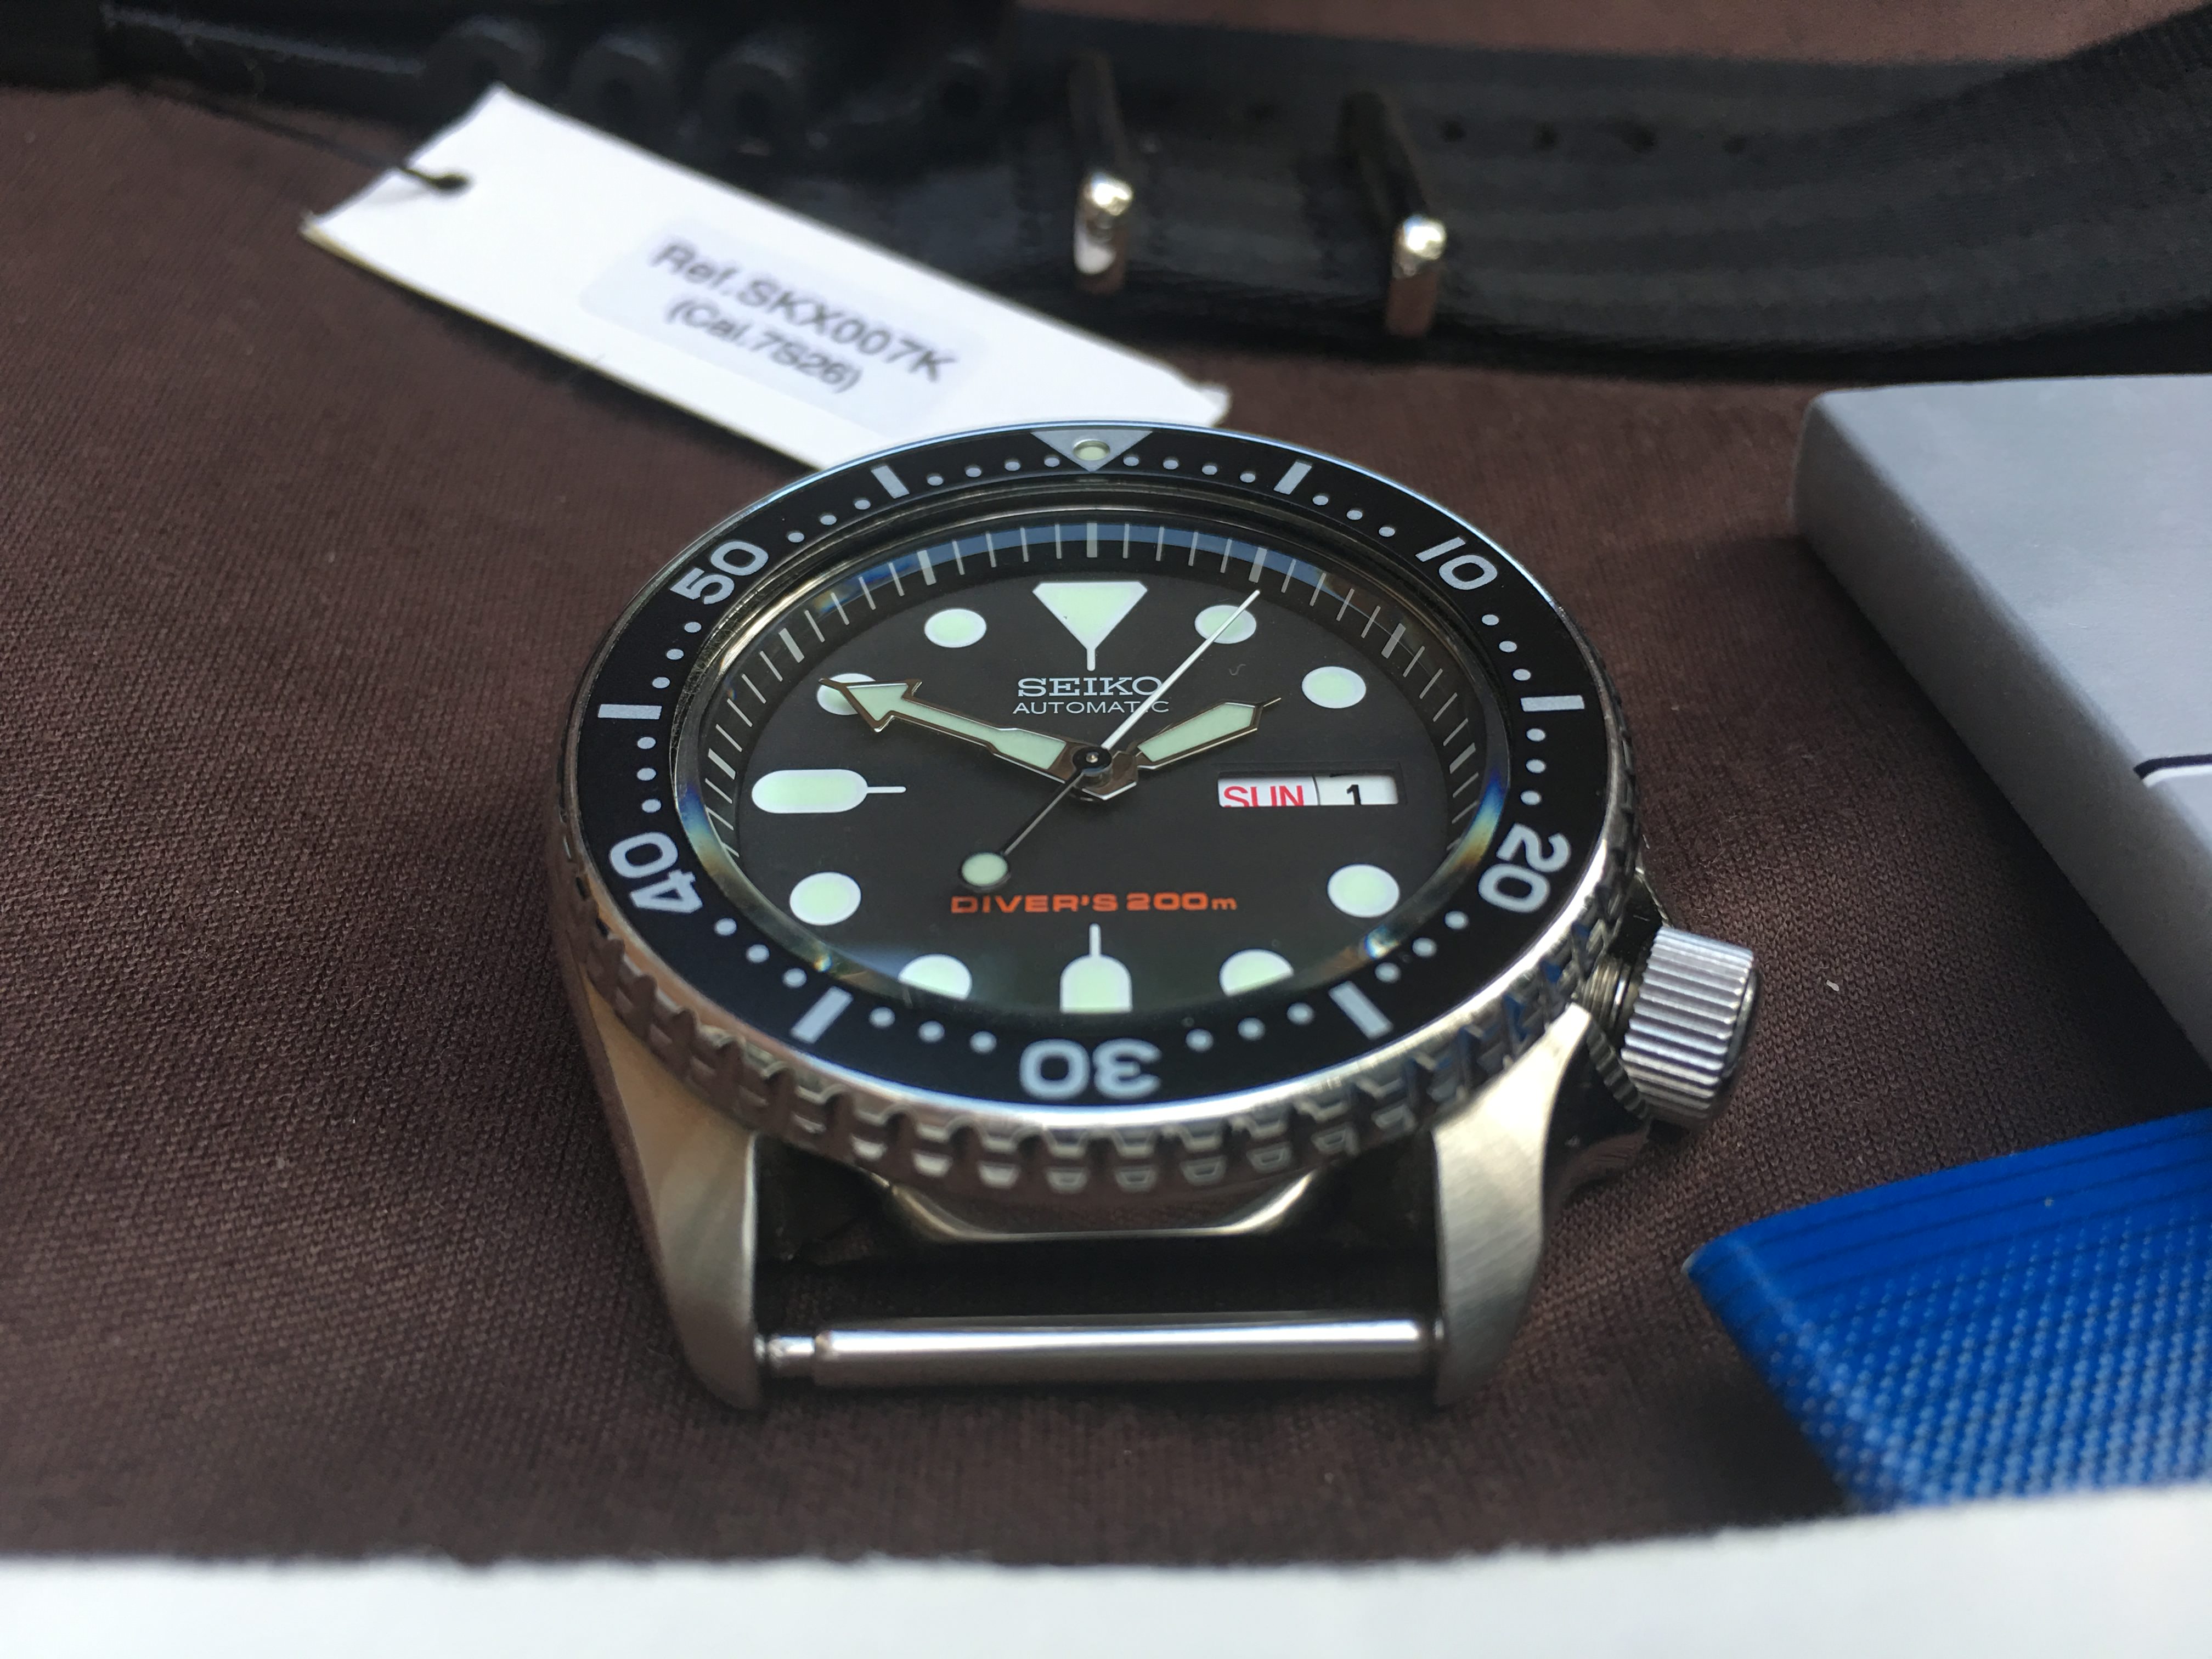 [WTS] Excellent condition Seiko SKX007 - face to face in NYC only ...